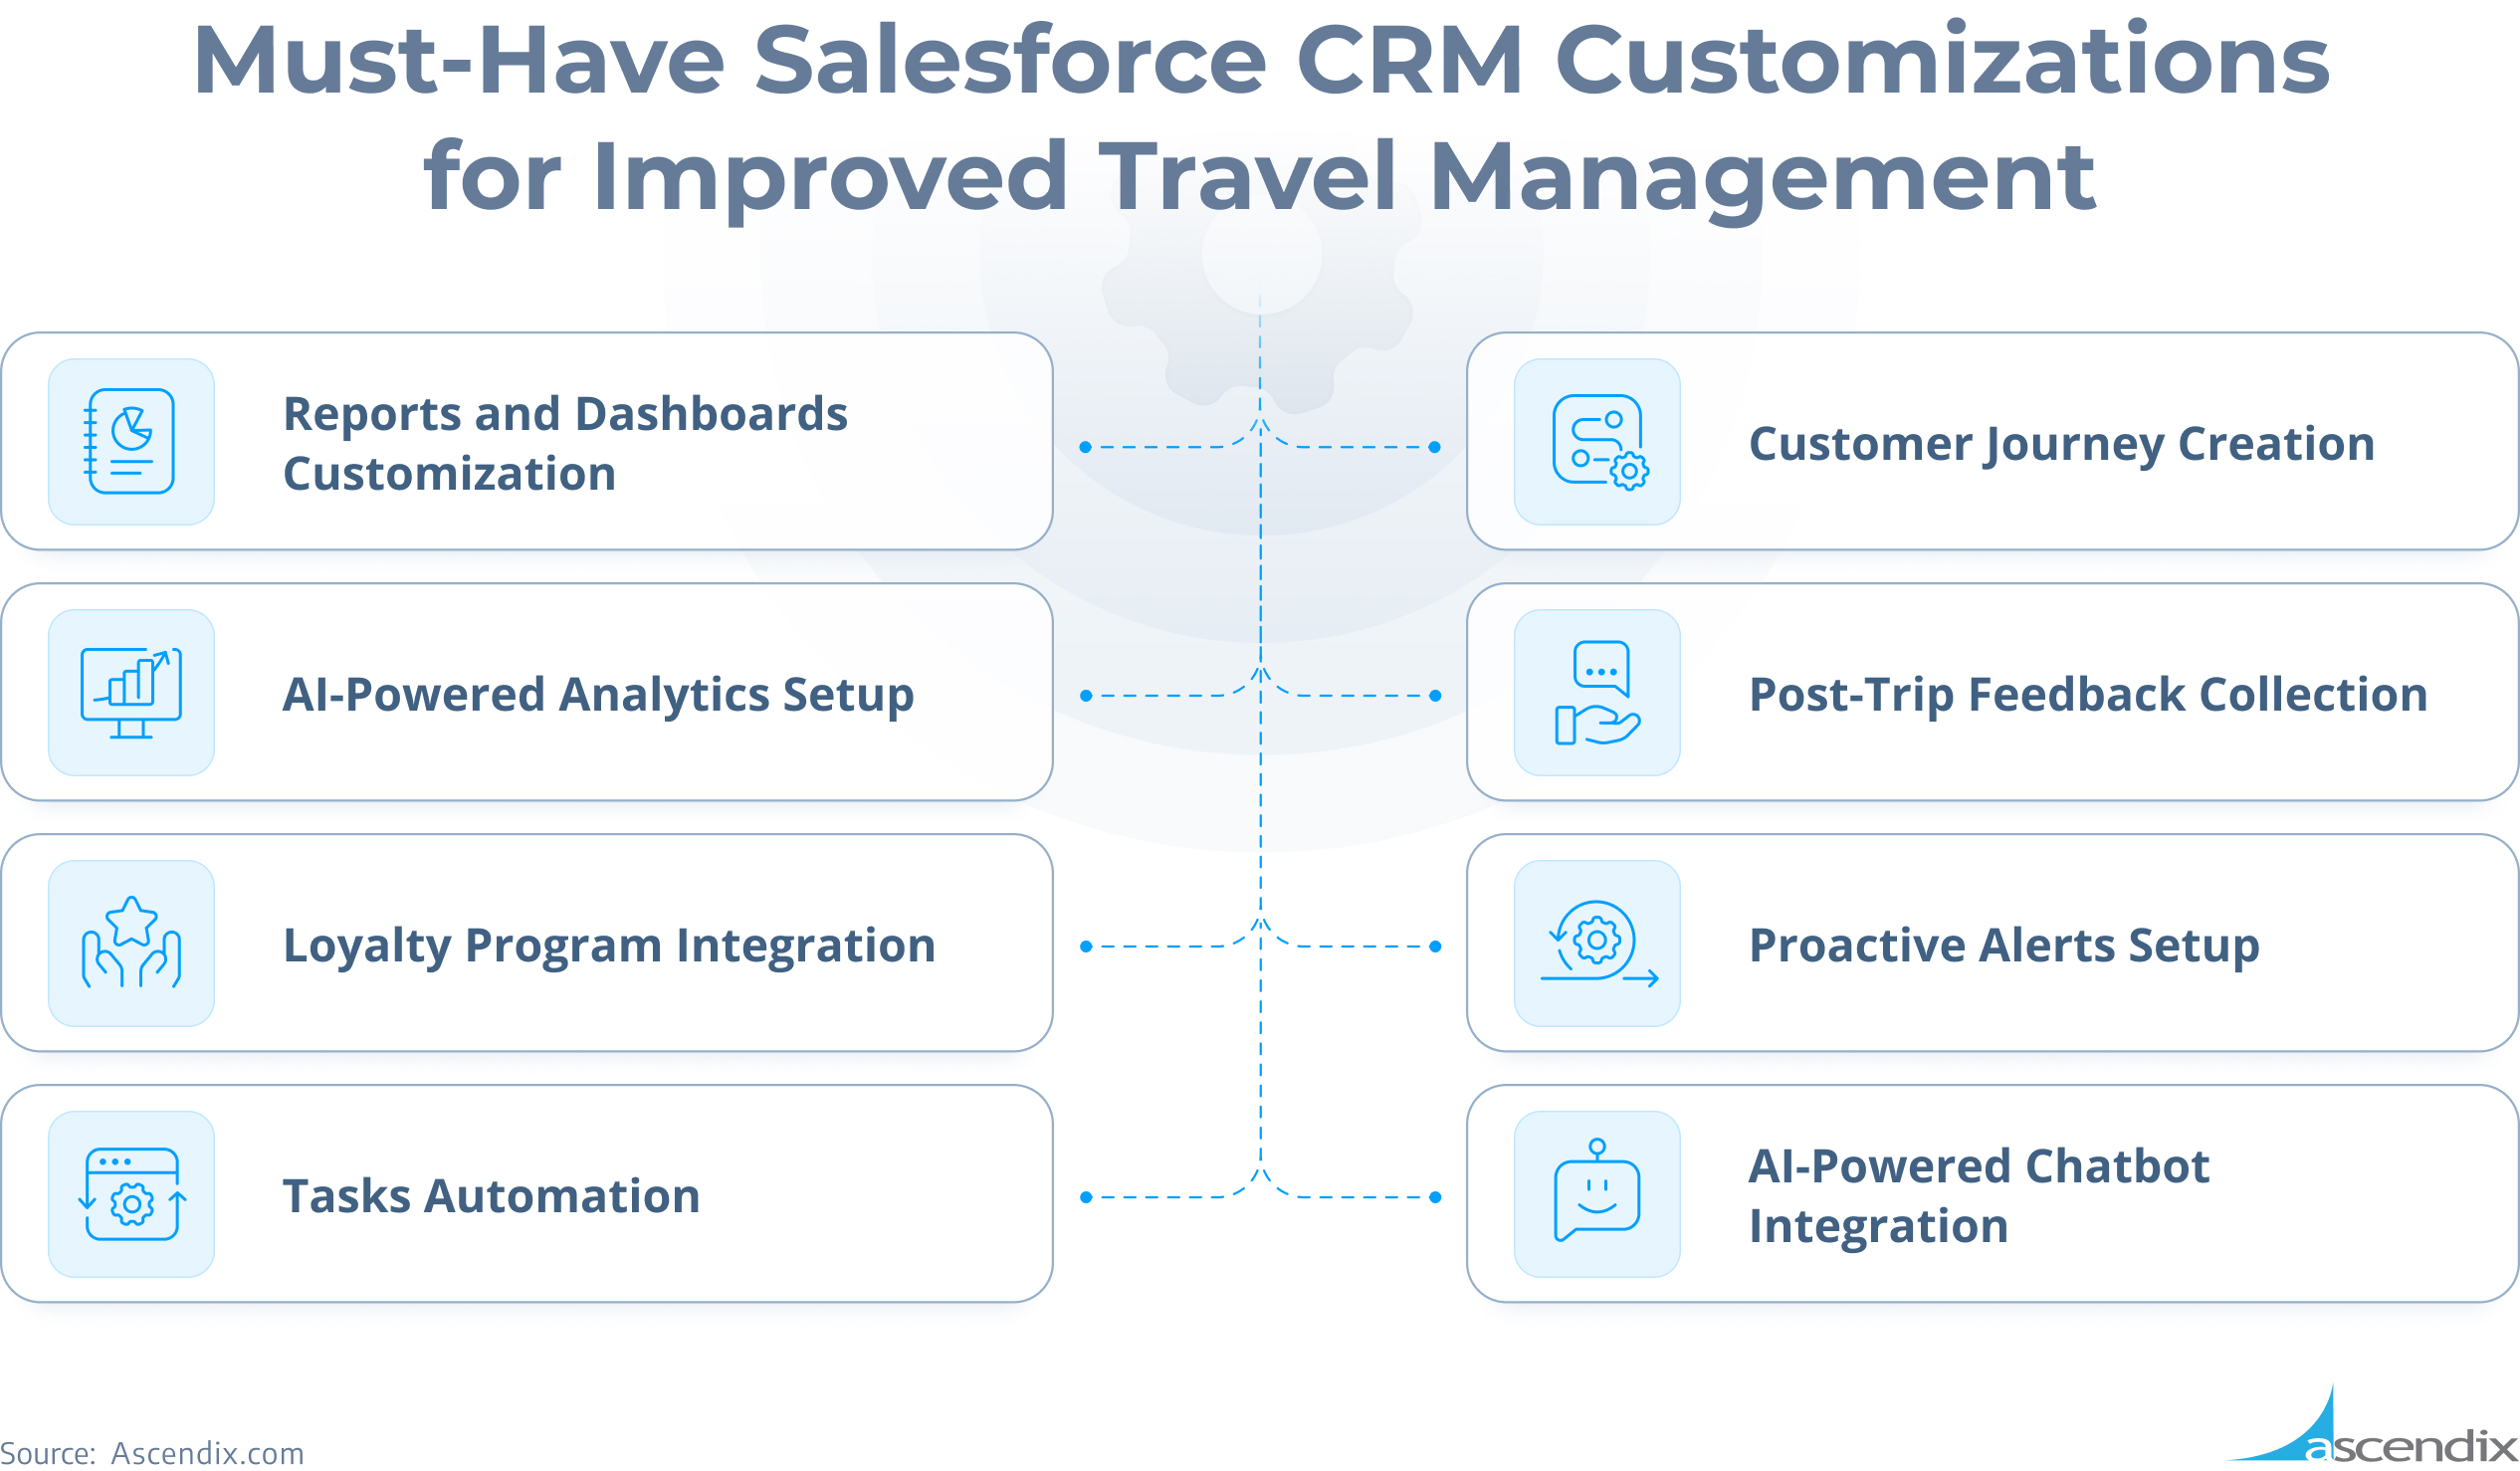 Must-Have Salesforce CRM Customizations for Improved Travel Management | Ascendix